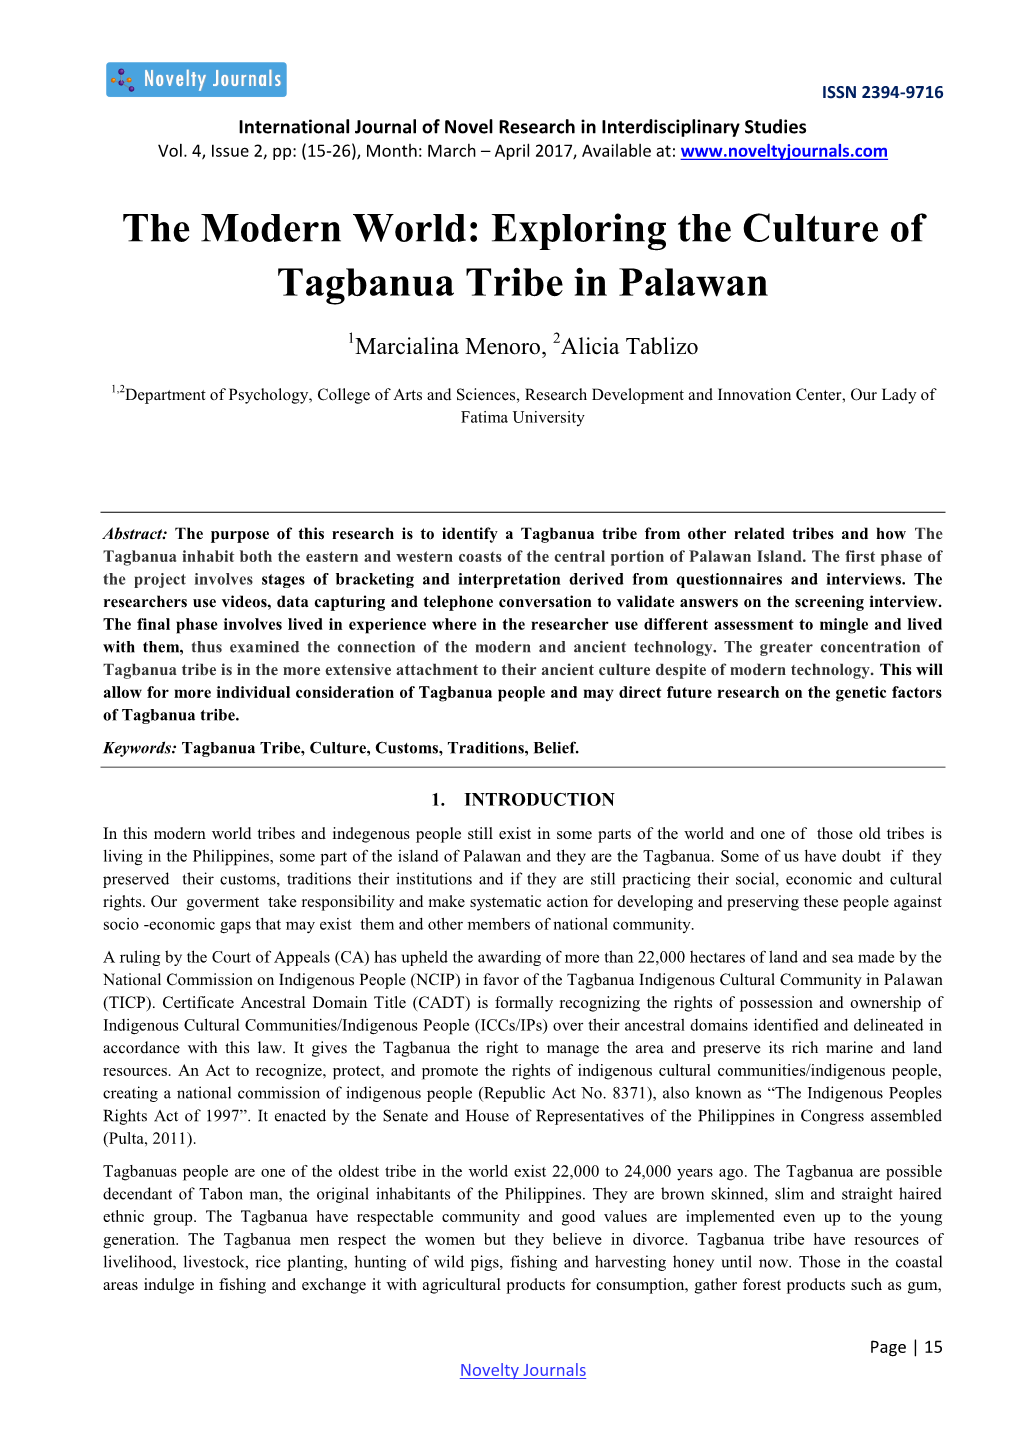 The Modern World: Exploring the Culture of Tagbanua Tribe in Palawan